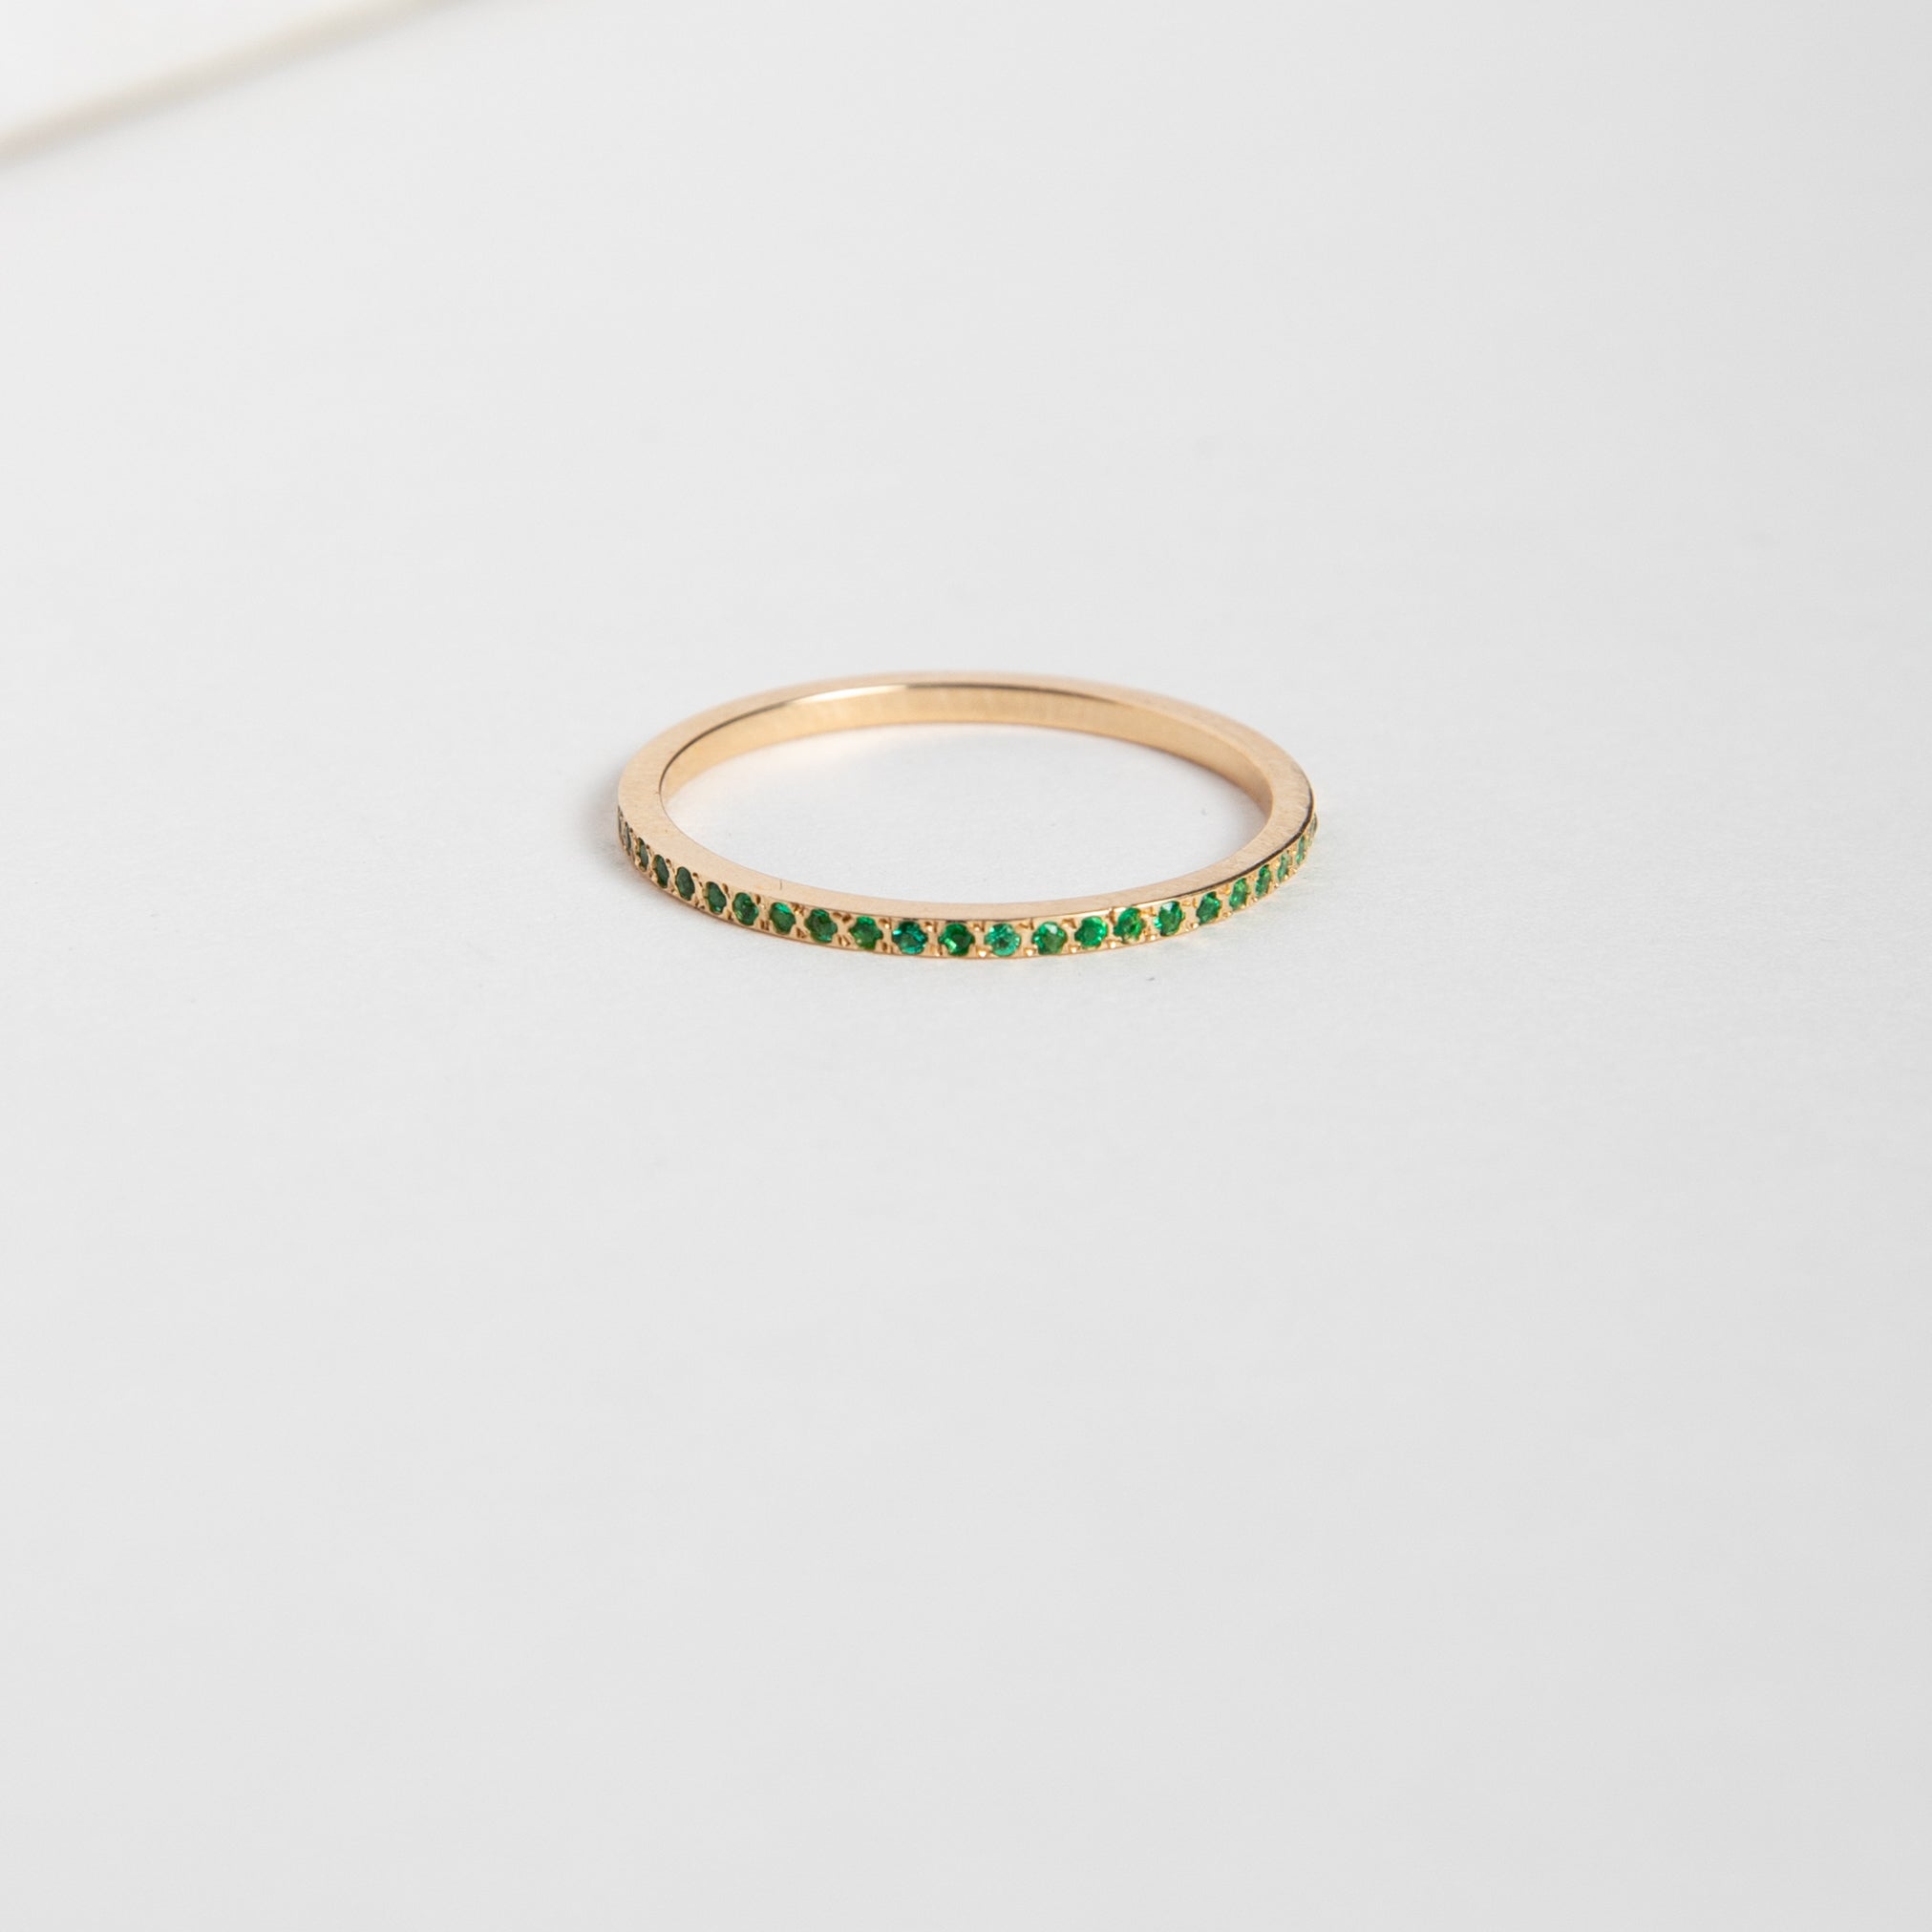 Eile Designer Ring in 14k Yellow Gold set with with Emeralds